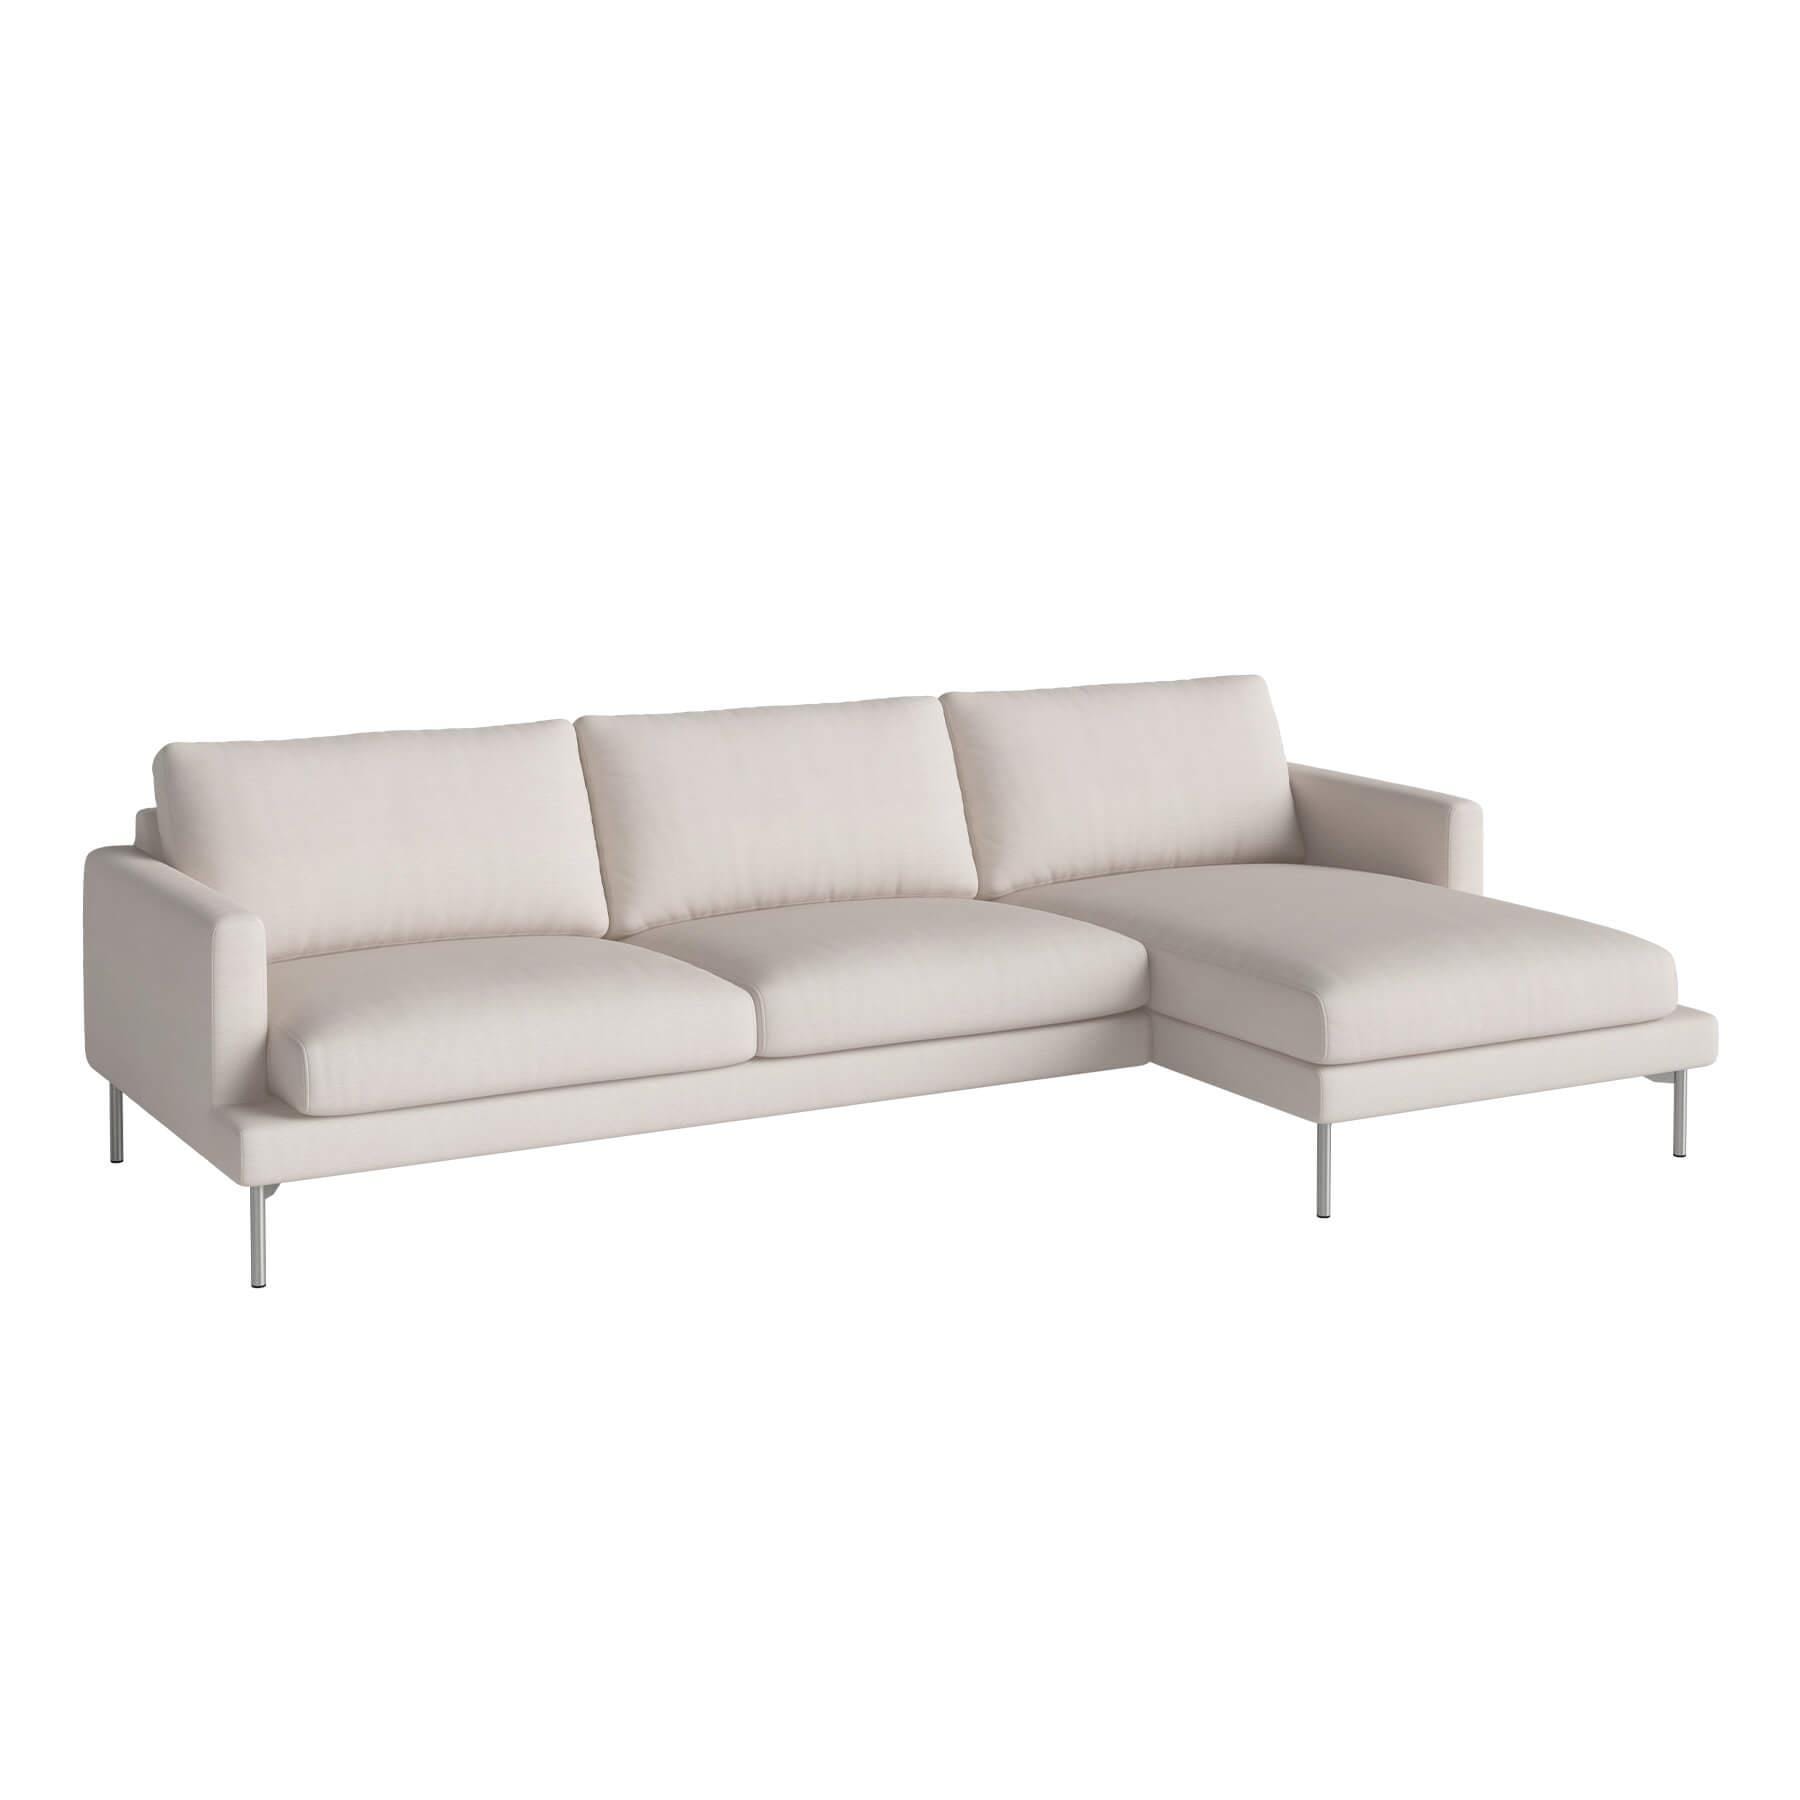 Bolia Veneda Sofa 35 Seater Sofa With Chaise Longue Brushed Steel Linea Beige Right Brown Designer Furniture From Holloways Of Ludlow